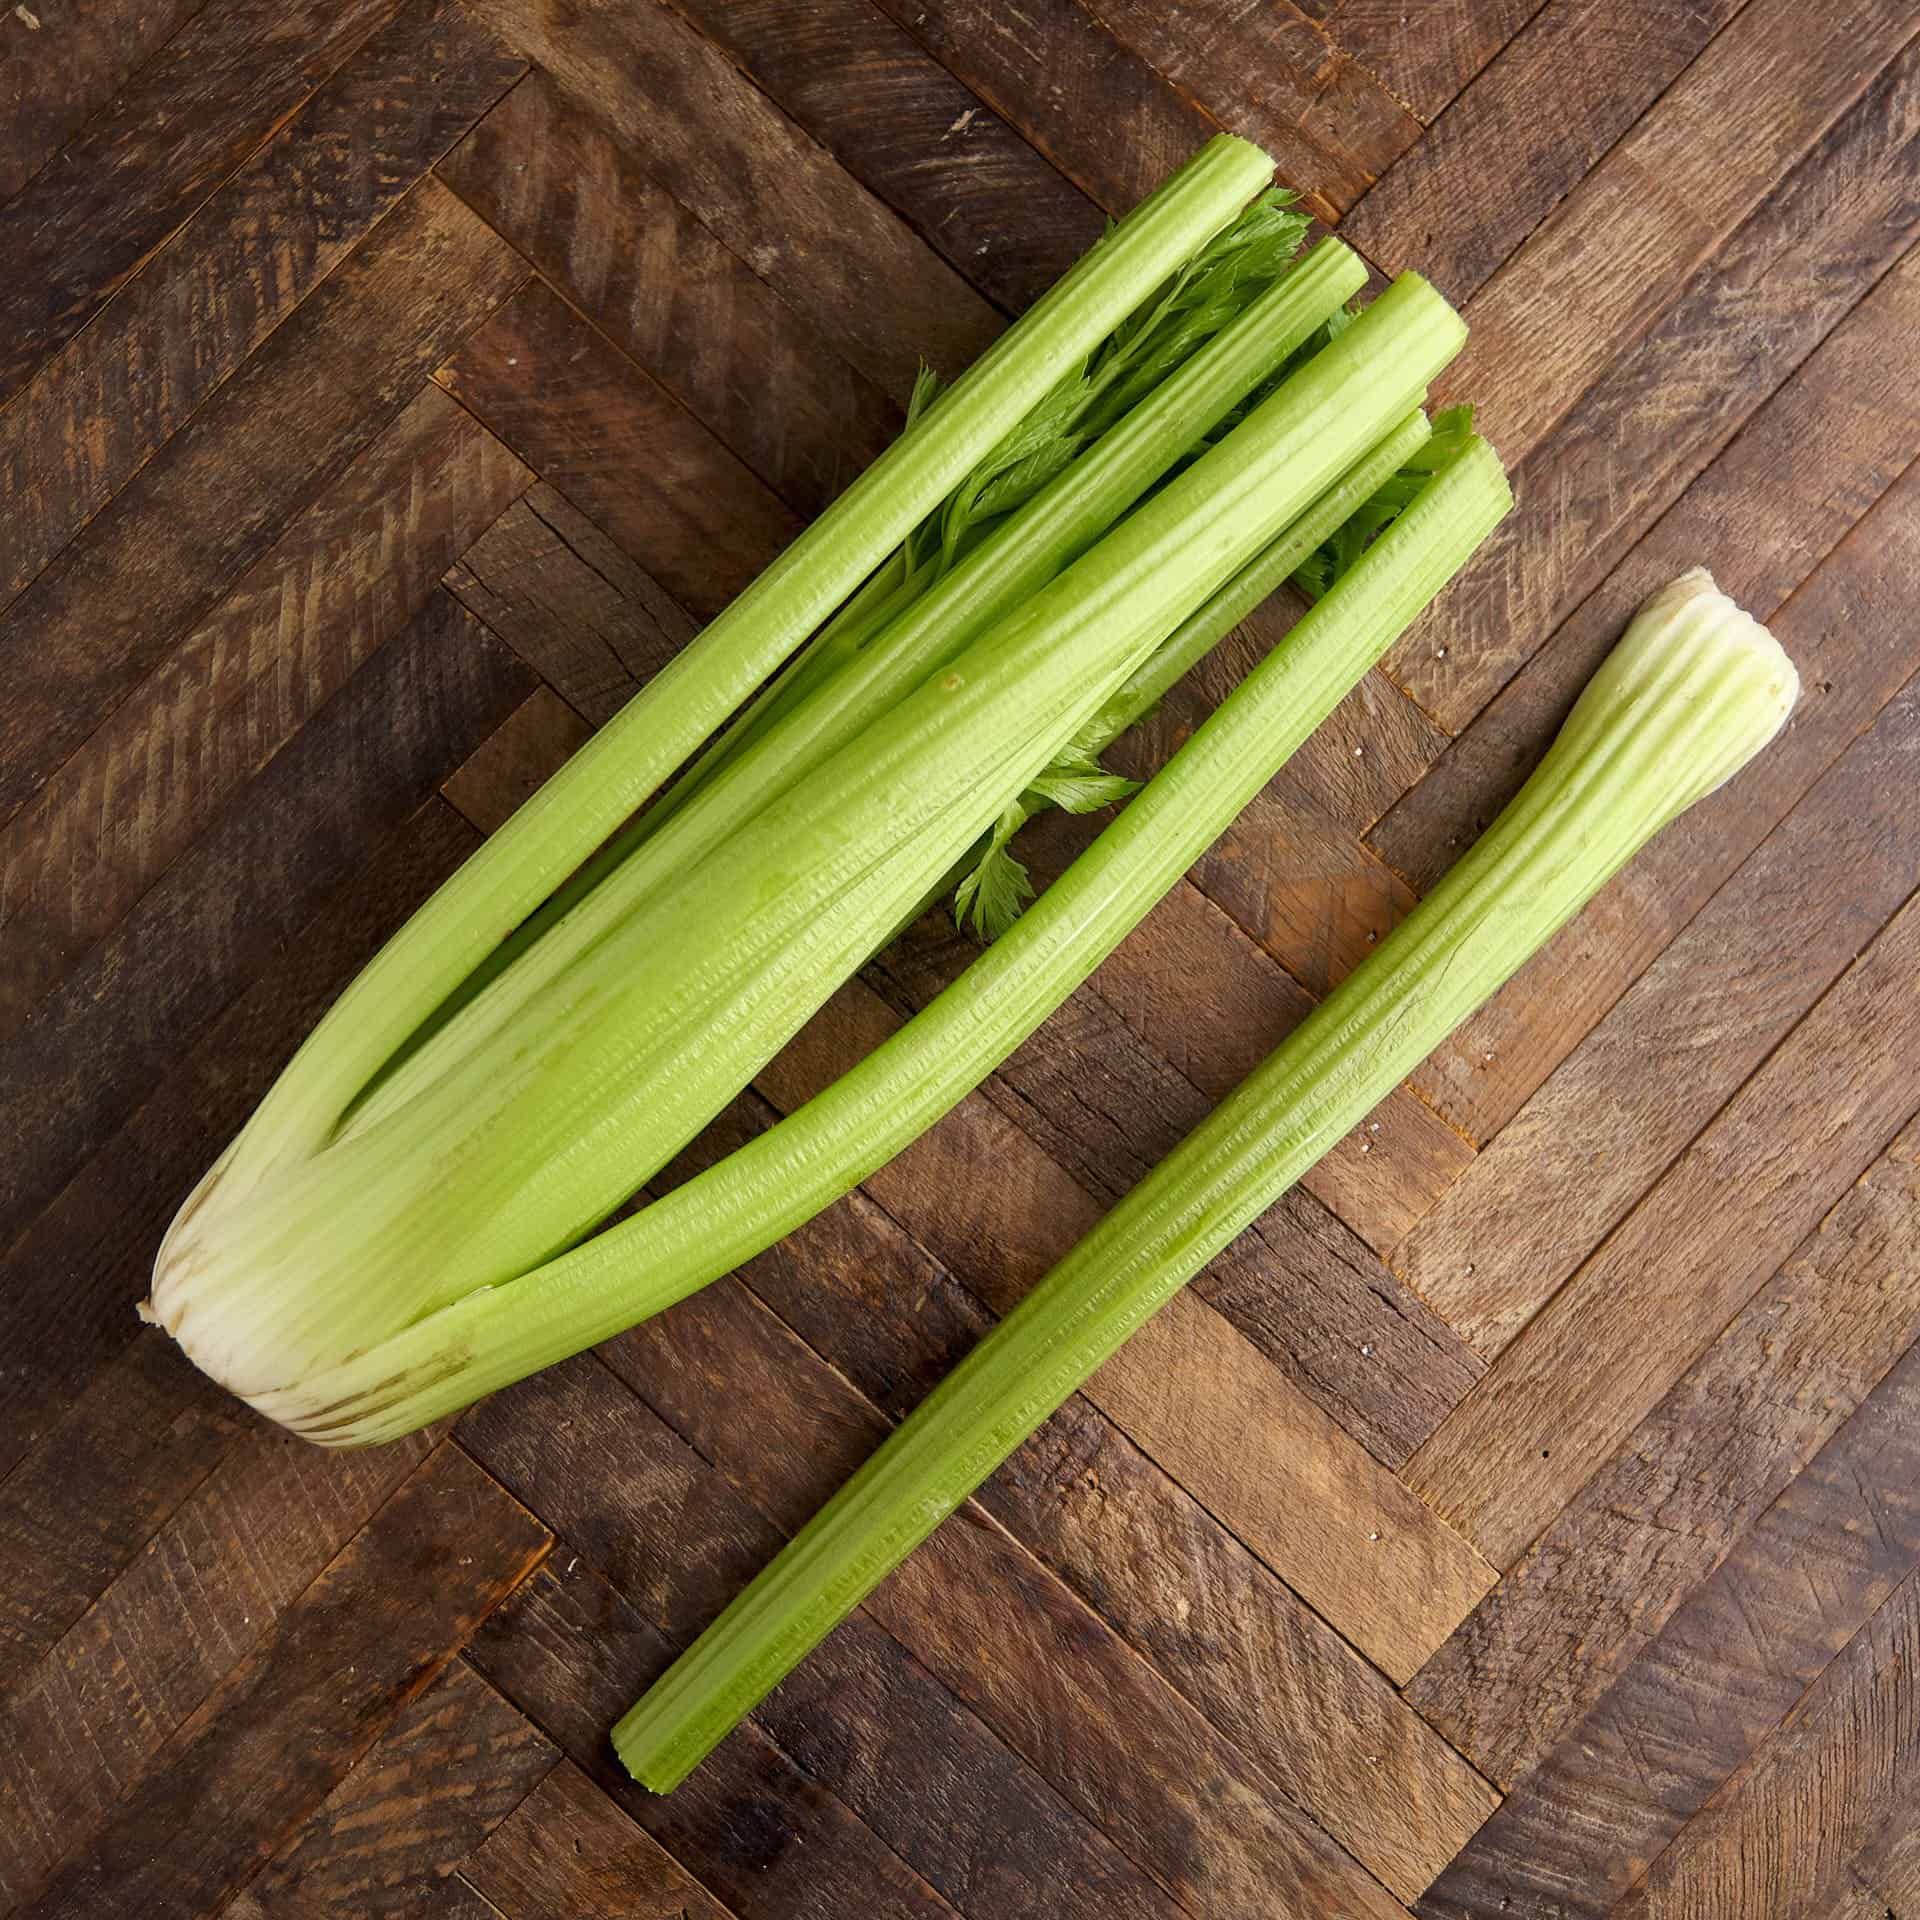 How Many Celery Stalks in a Cup? 